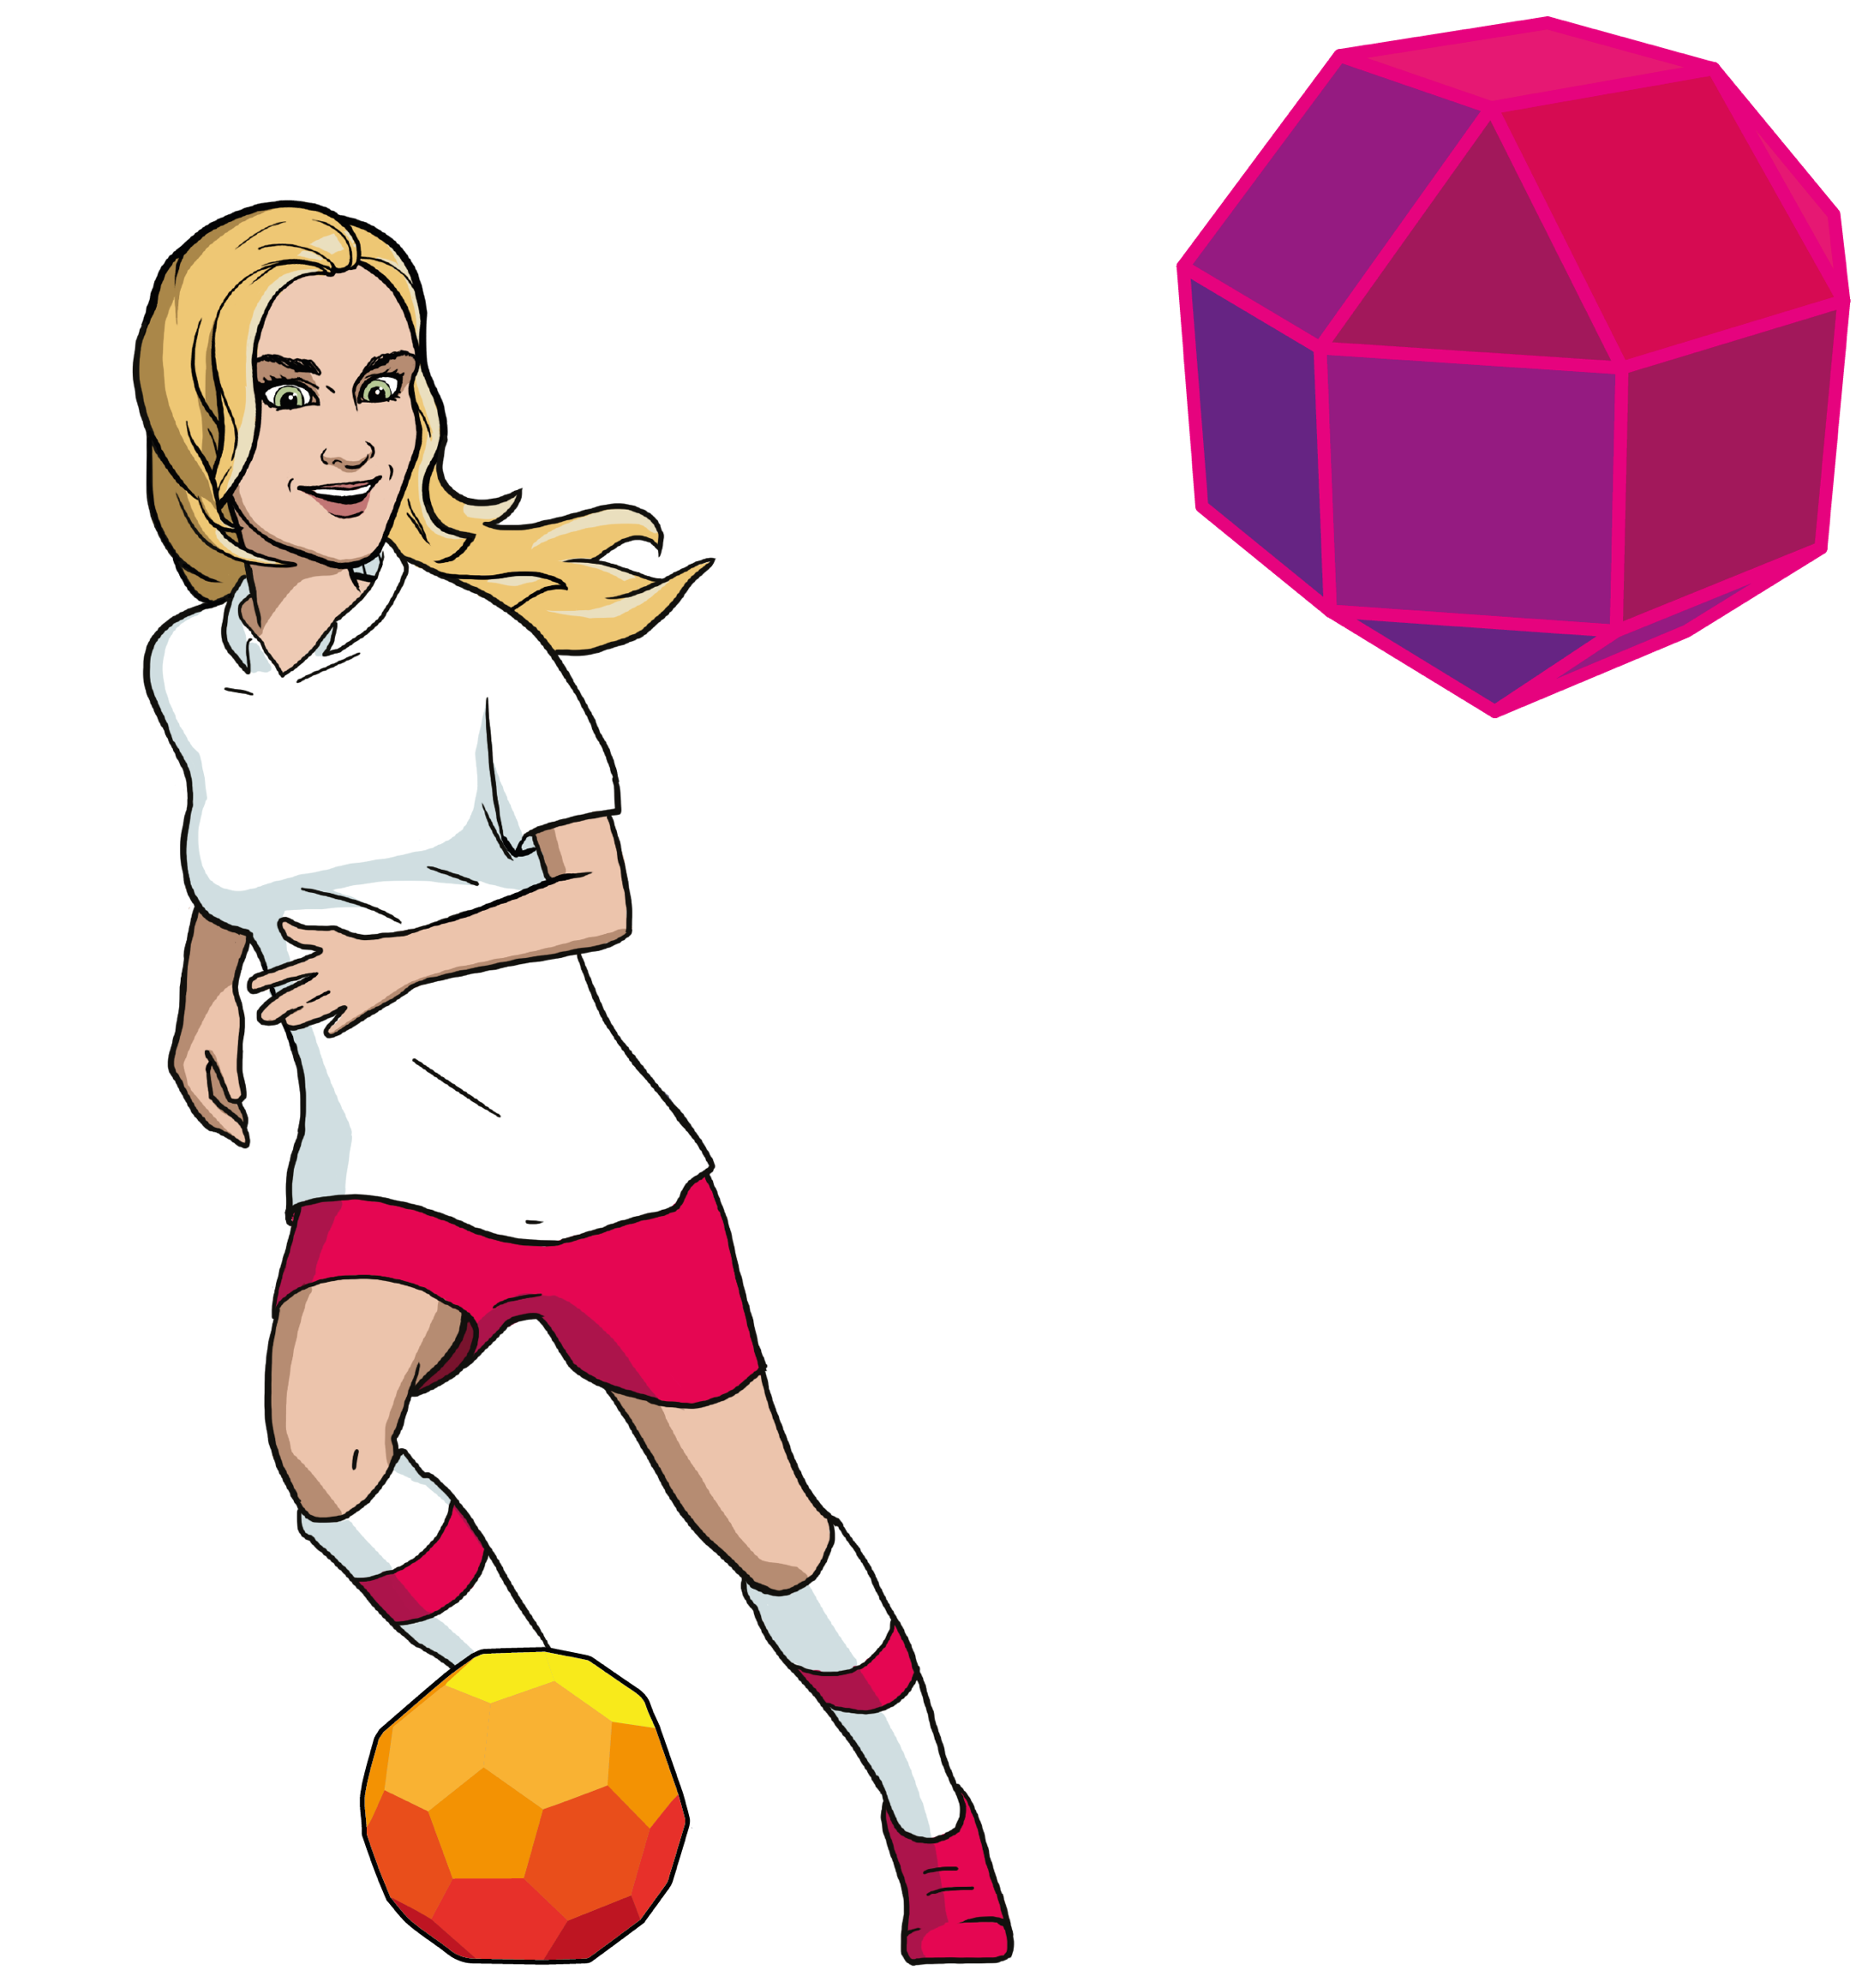 The math master playing fotball with a another polyhedron nearby